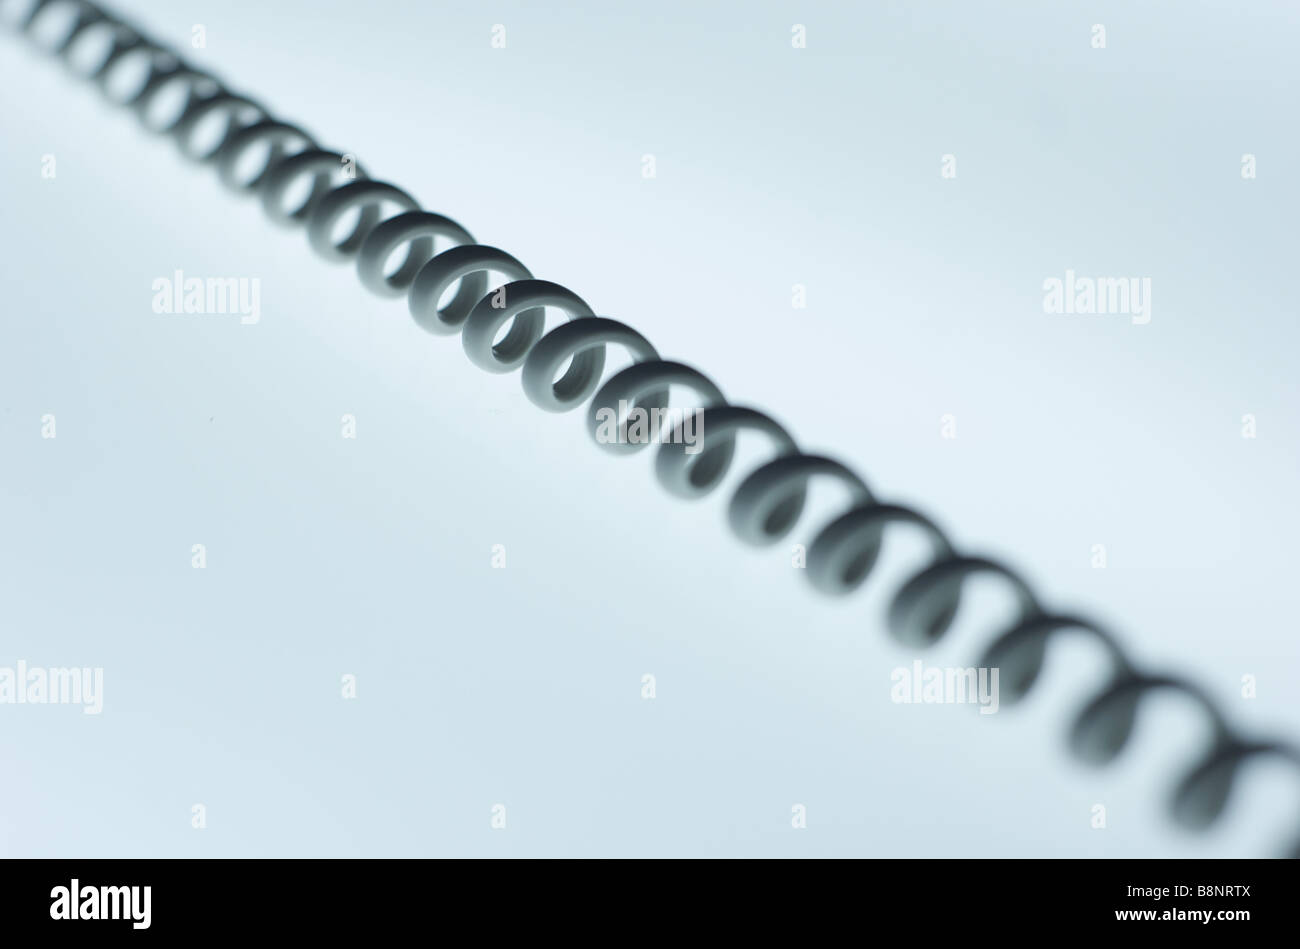 Closeup of Stretched Telephone Cord Stock Photo